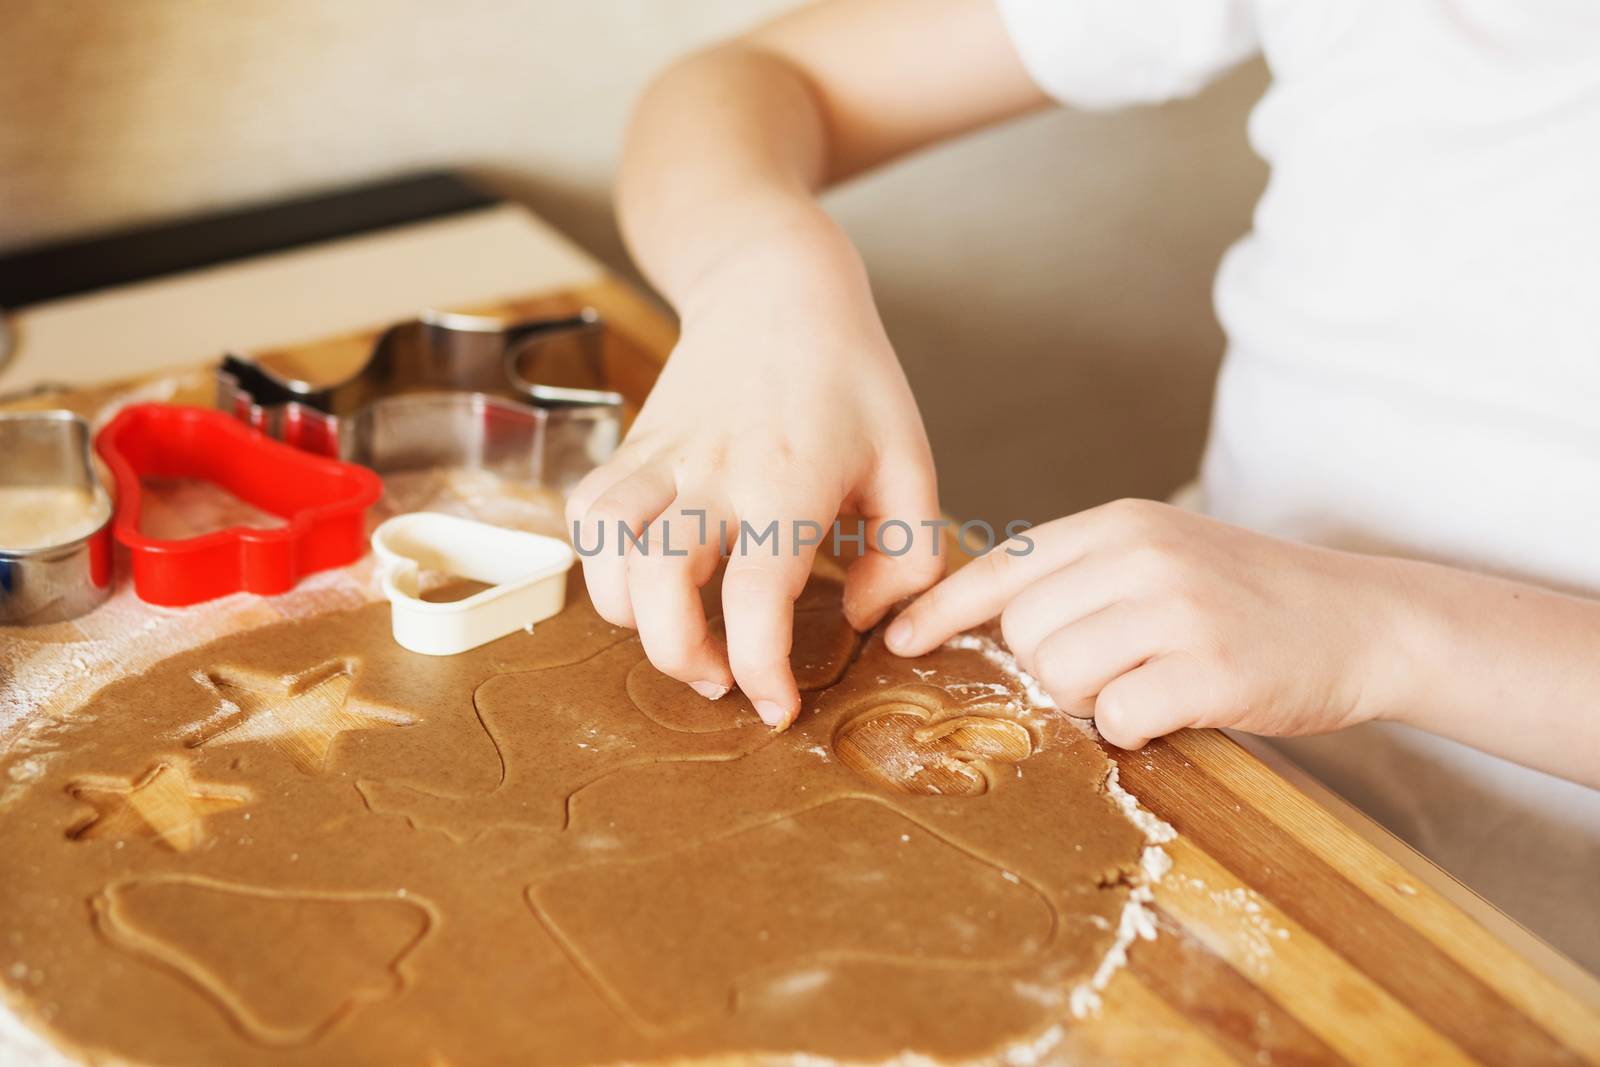 Children's hands make gingerbread. Small boy cutting cookies for Christmas. Kid Baking Cooking Cookies Fun Concept. Master class for children on baking christmas gingerbread.